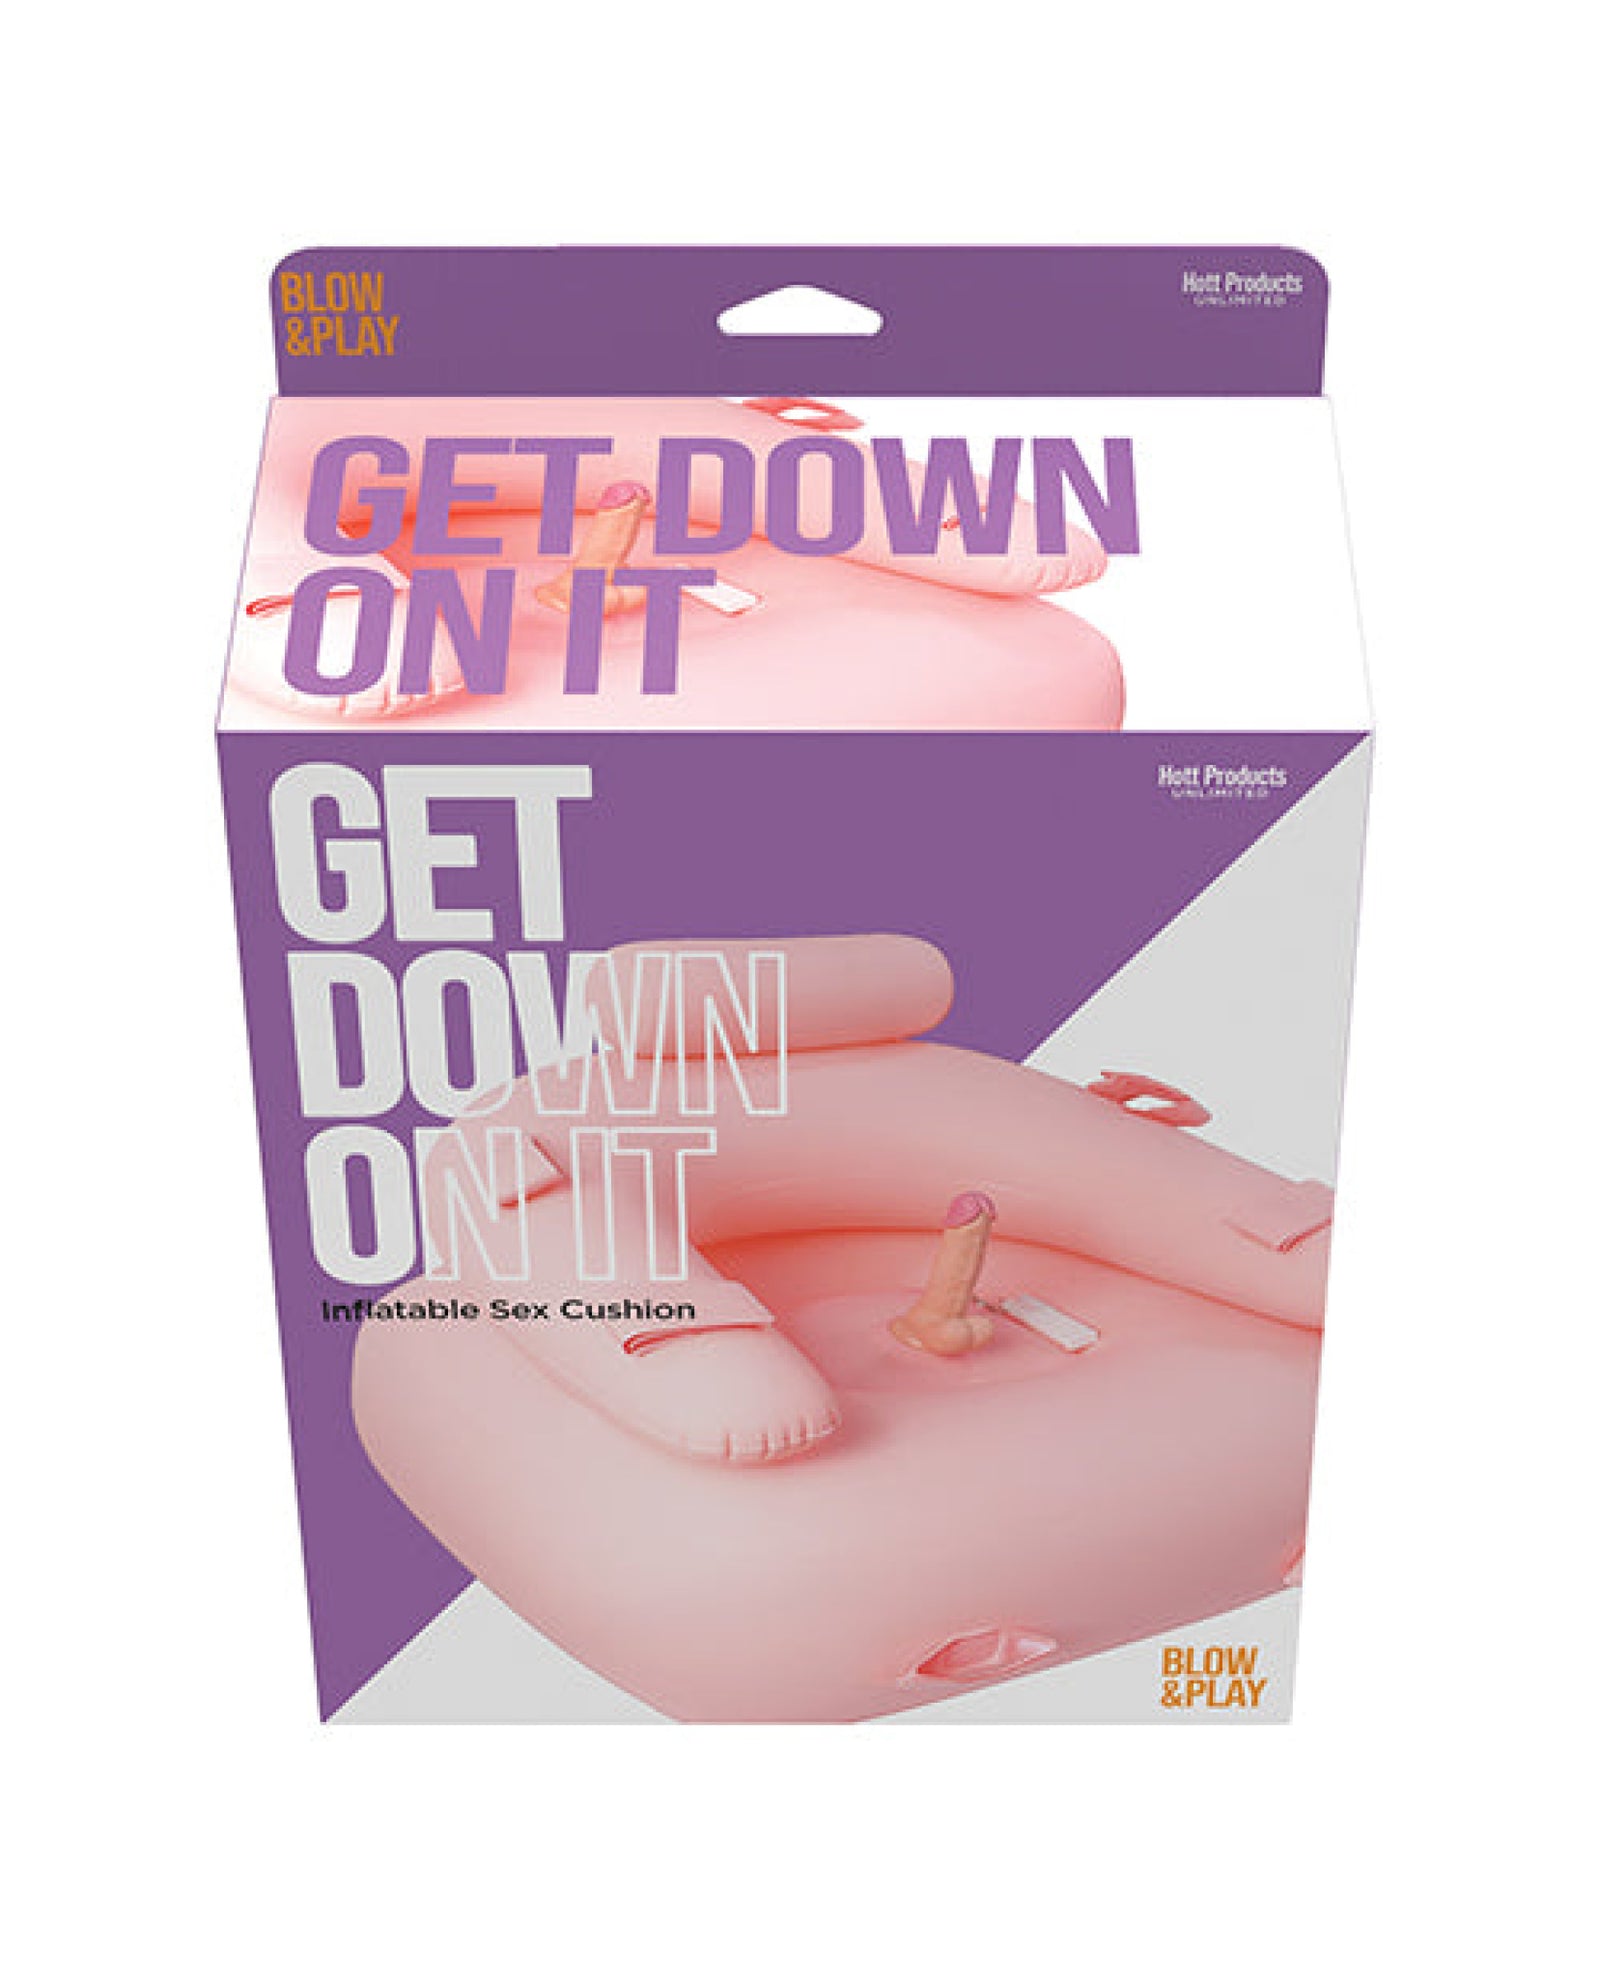 Get Down On It Inflatable Cushion w/Remote Controlled Dildo & Wrist/Leg Strap Hott Products